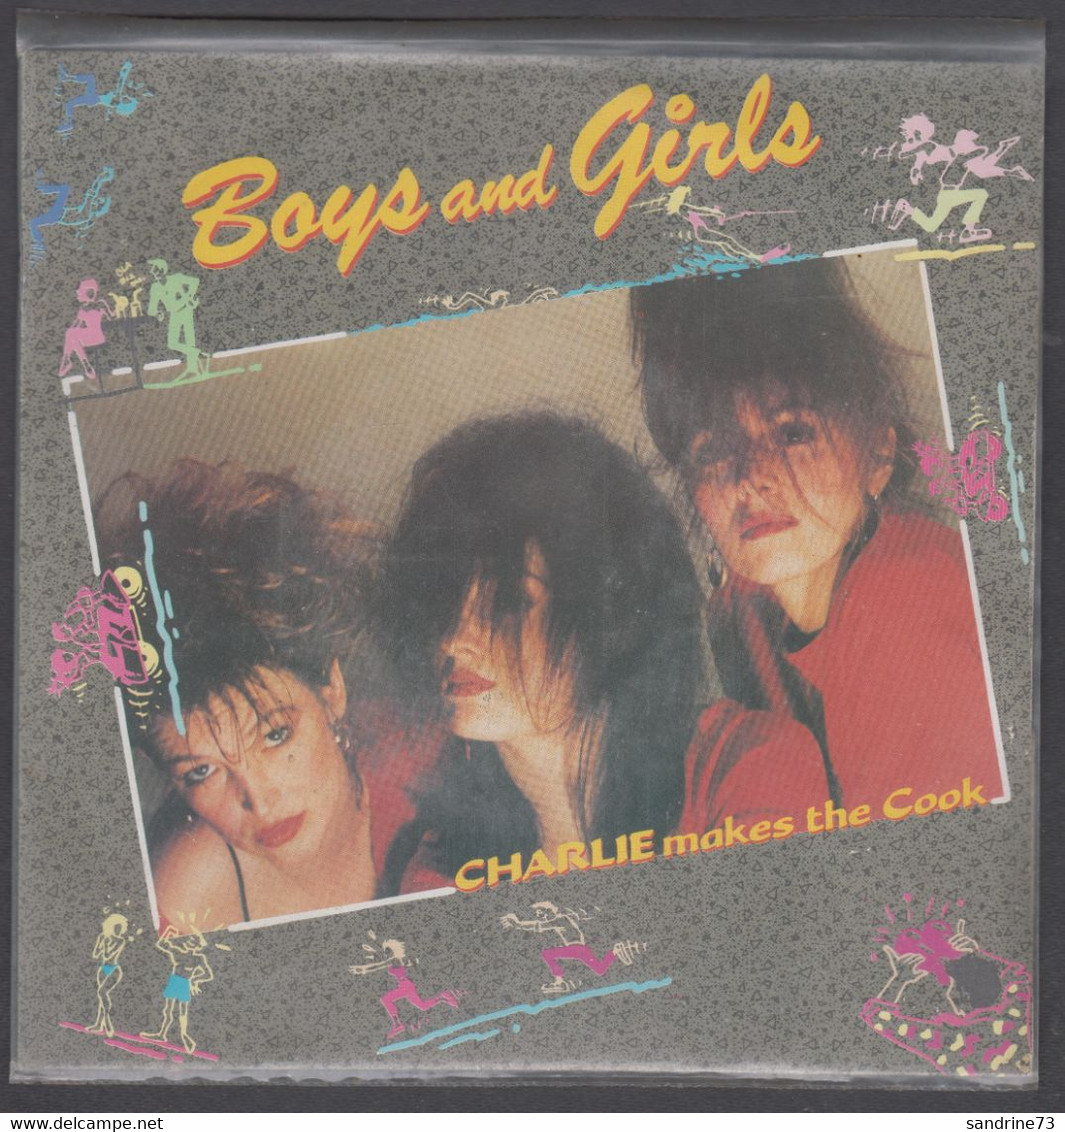 Disque Vinyle 45t - Charlie Makes The Cook - Boys And Girls - Dance, Techno En House